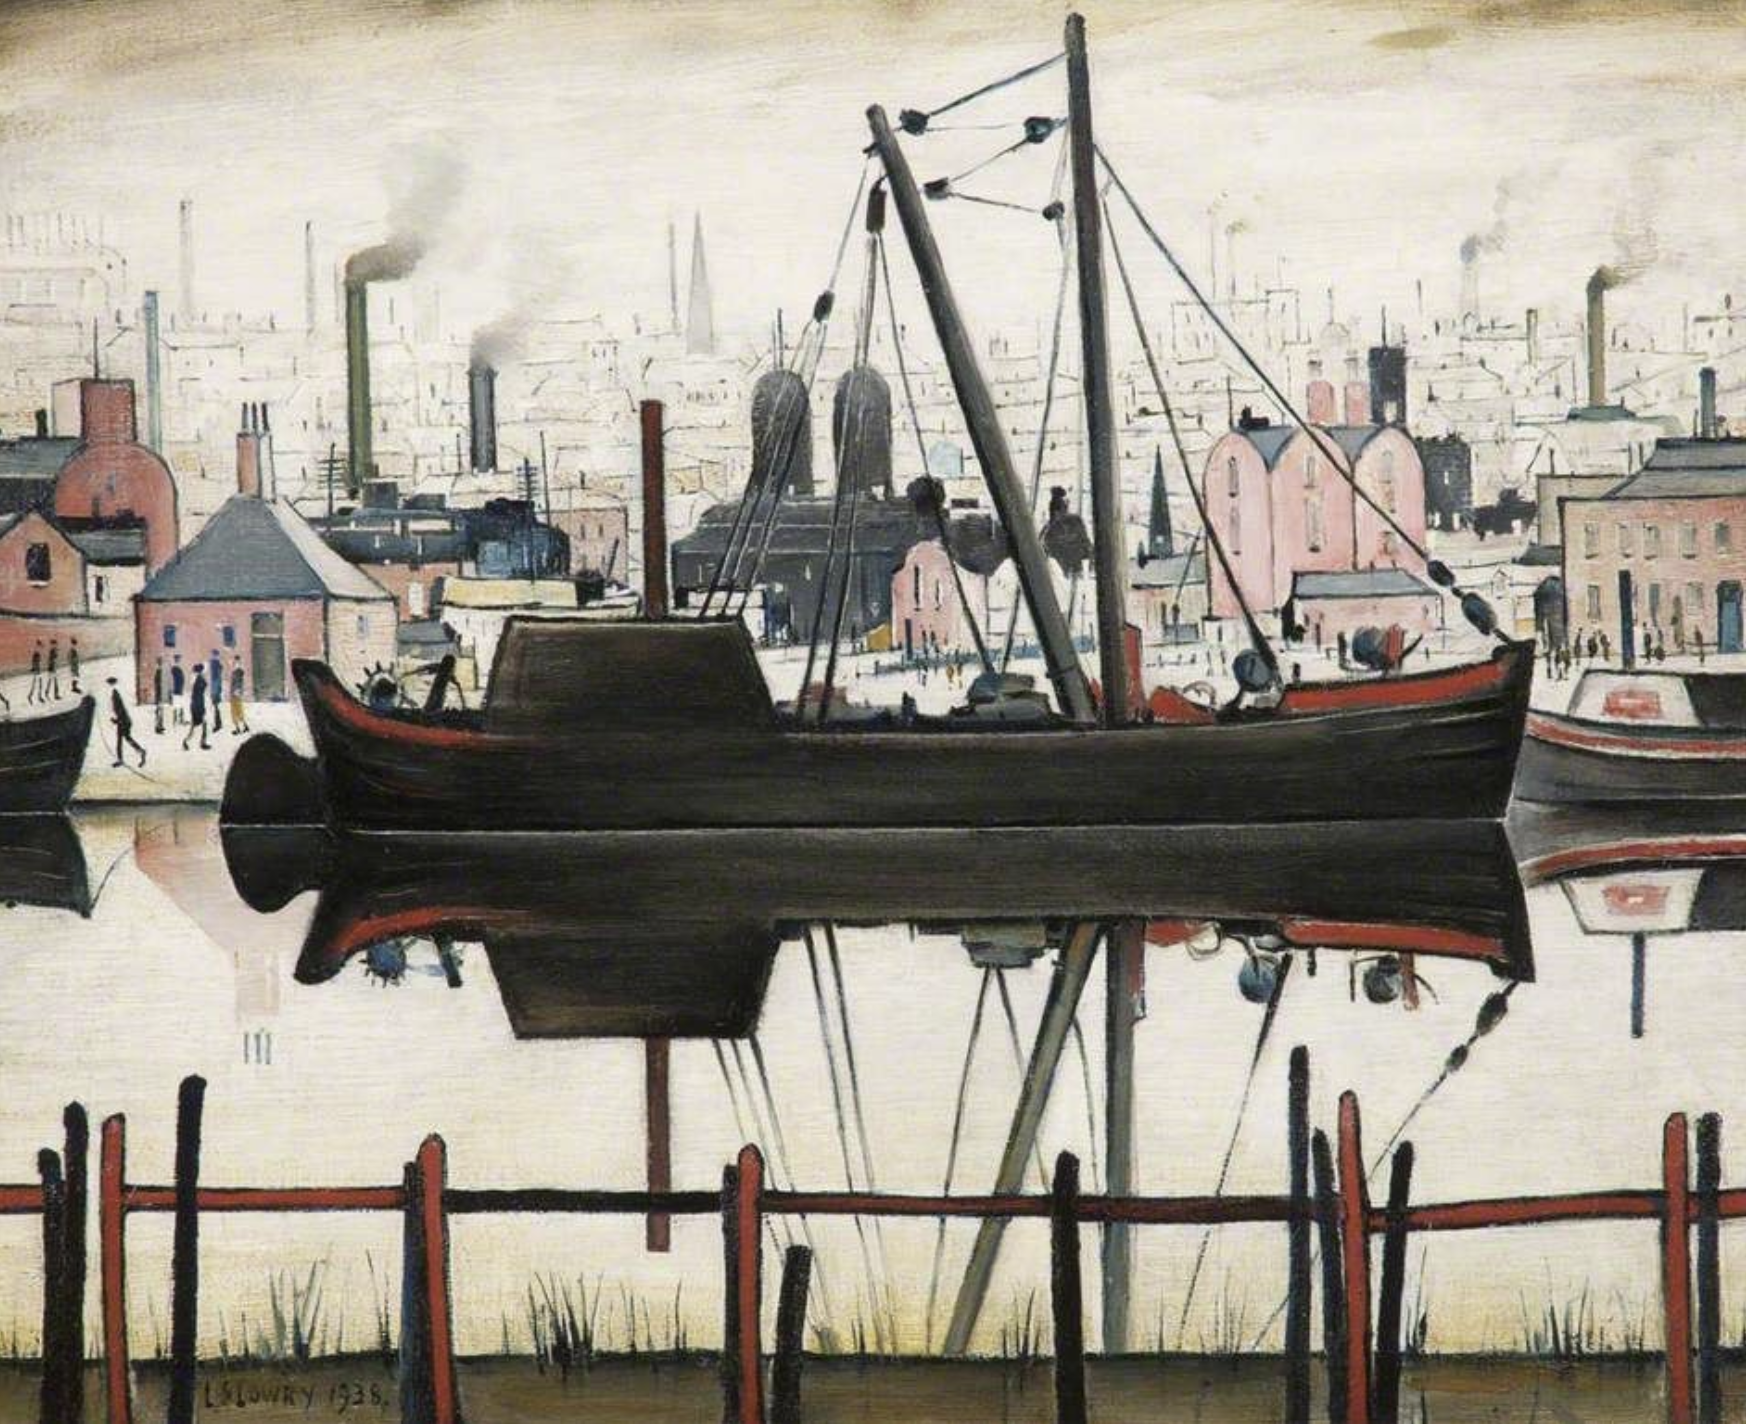 The Coal Barge (1938) by Laurence Stephen Lowry (1887 - 1976), English artist.